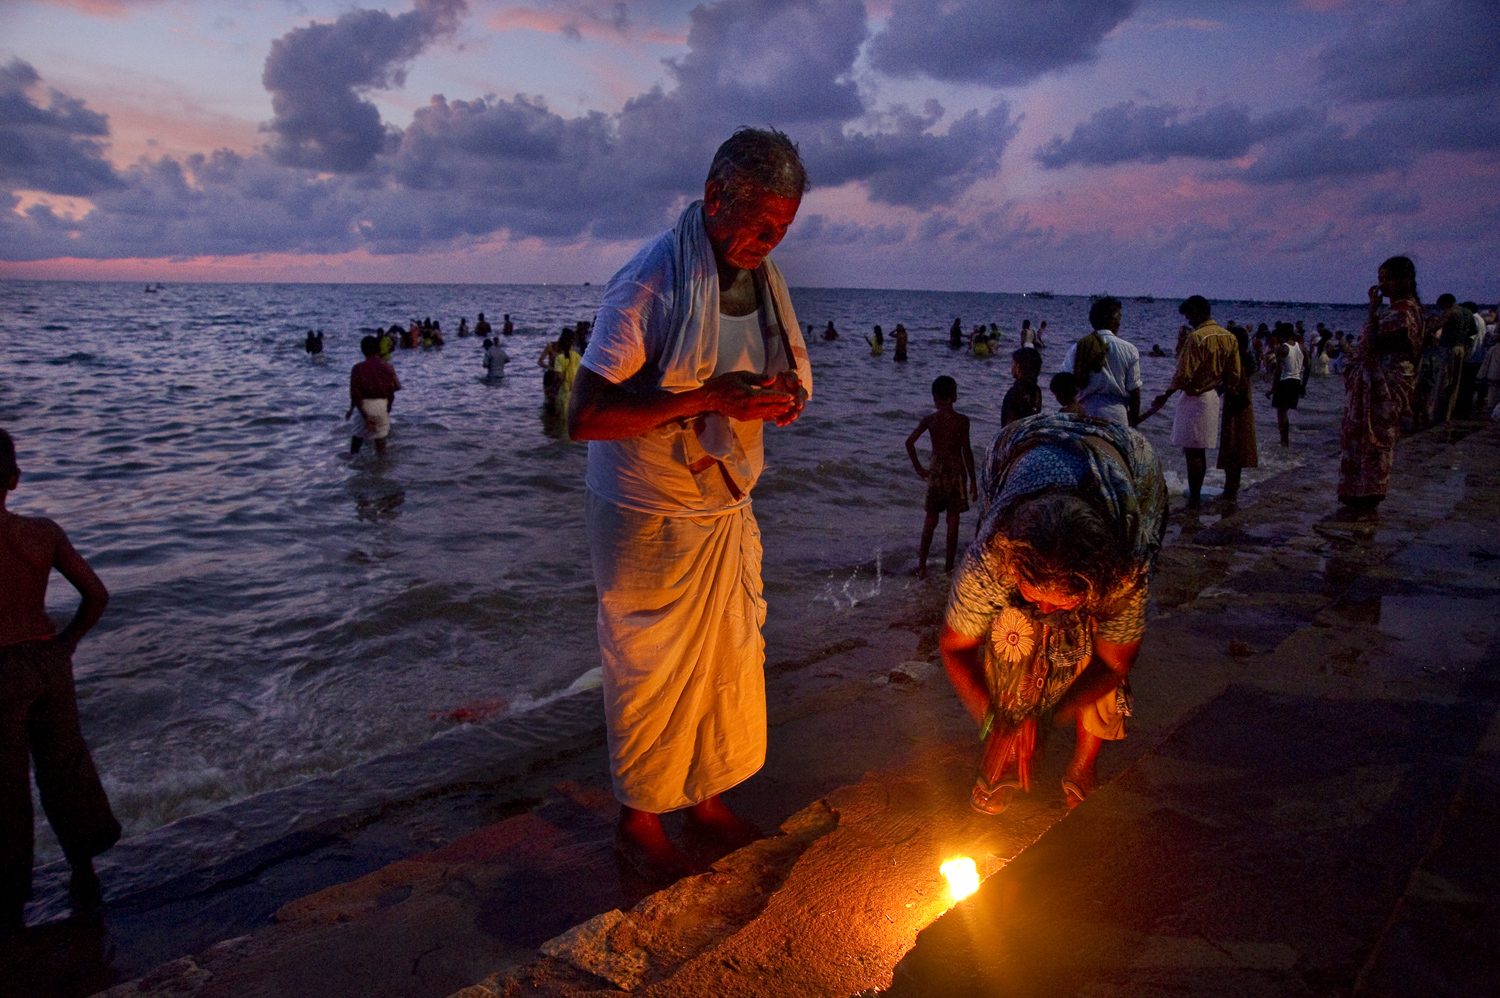  Hindu pilgrims making an offering outside Rameswaram's Ramanathaswamy temple, just before sunrise. Most Hindus believe that Hanuman and his army of monkeys built a bridge from this point in India to Sri Lanka to retrieve the kidnapped bride of Rama.